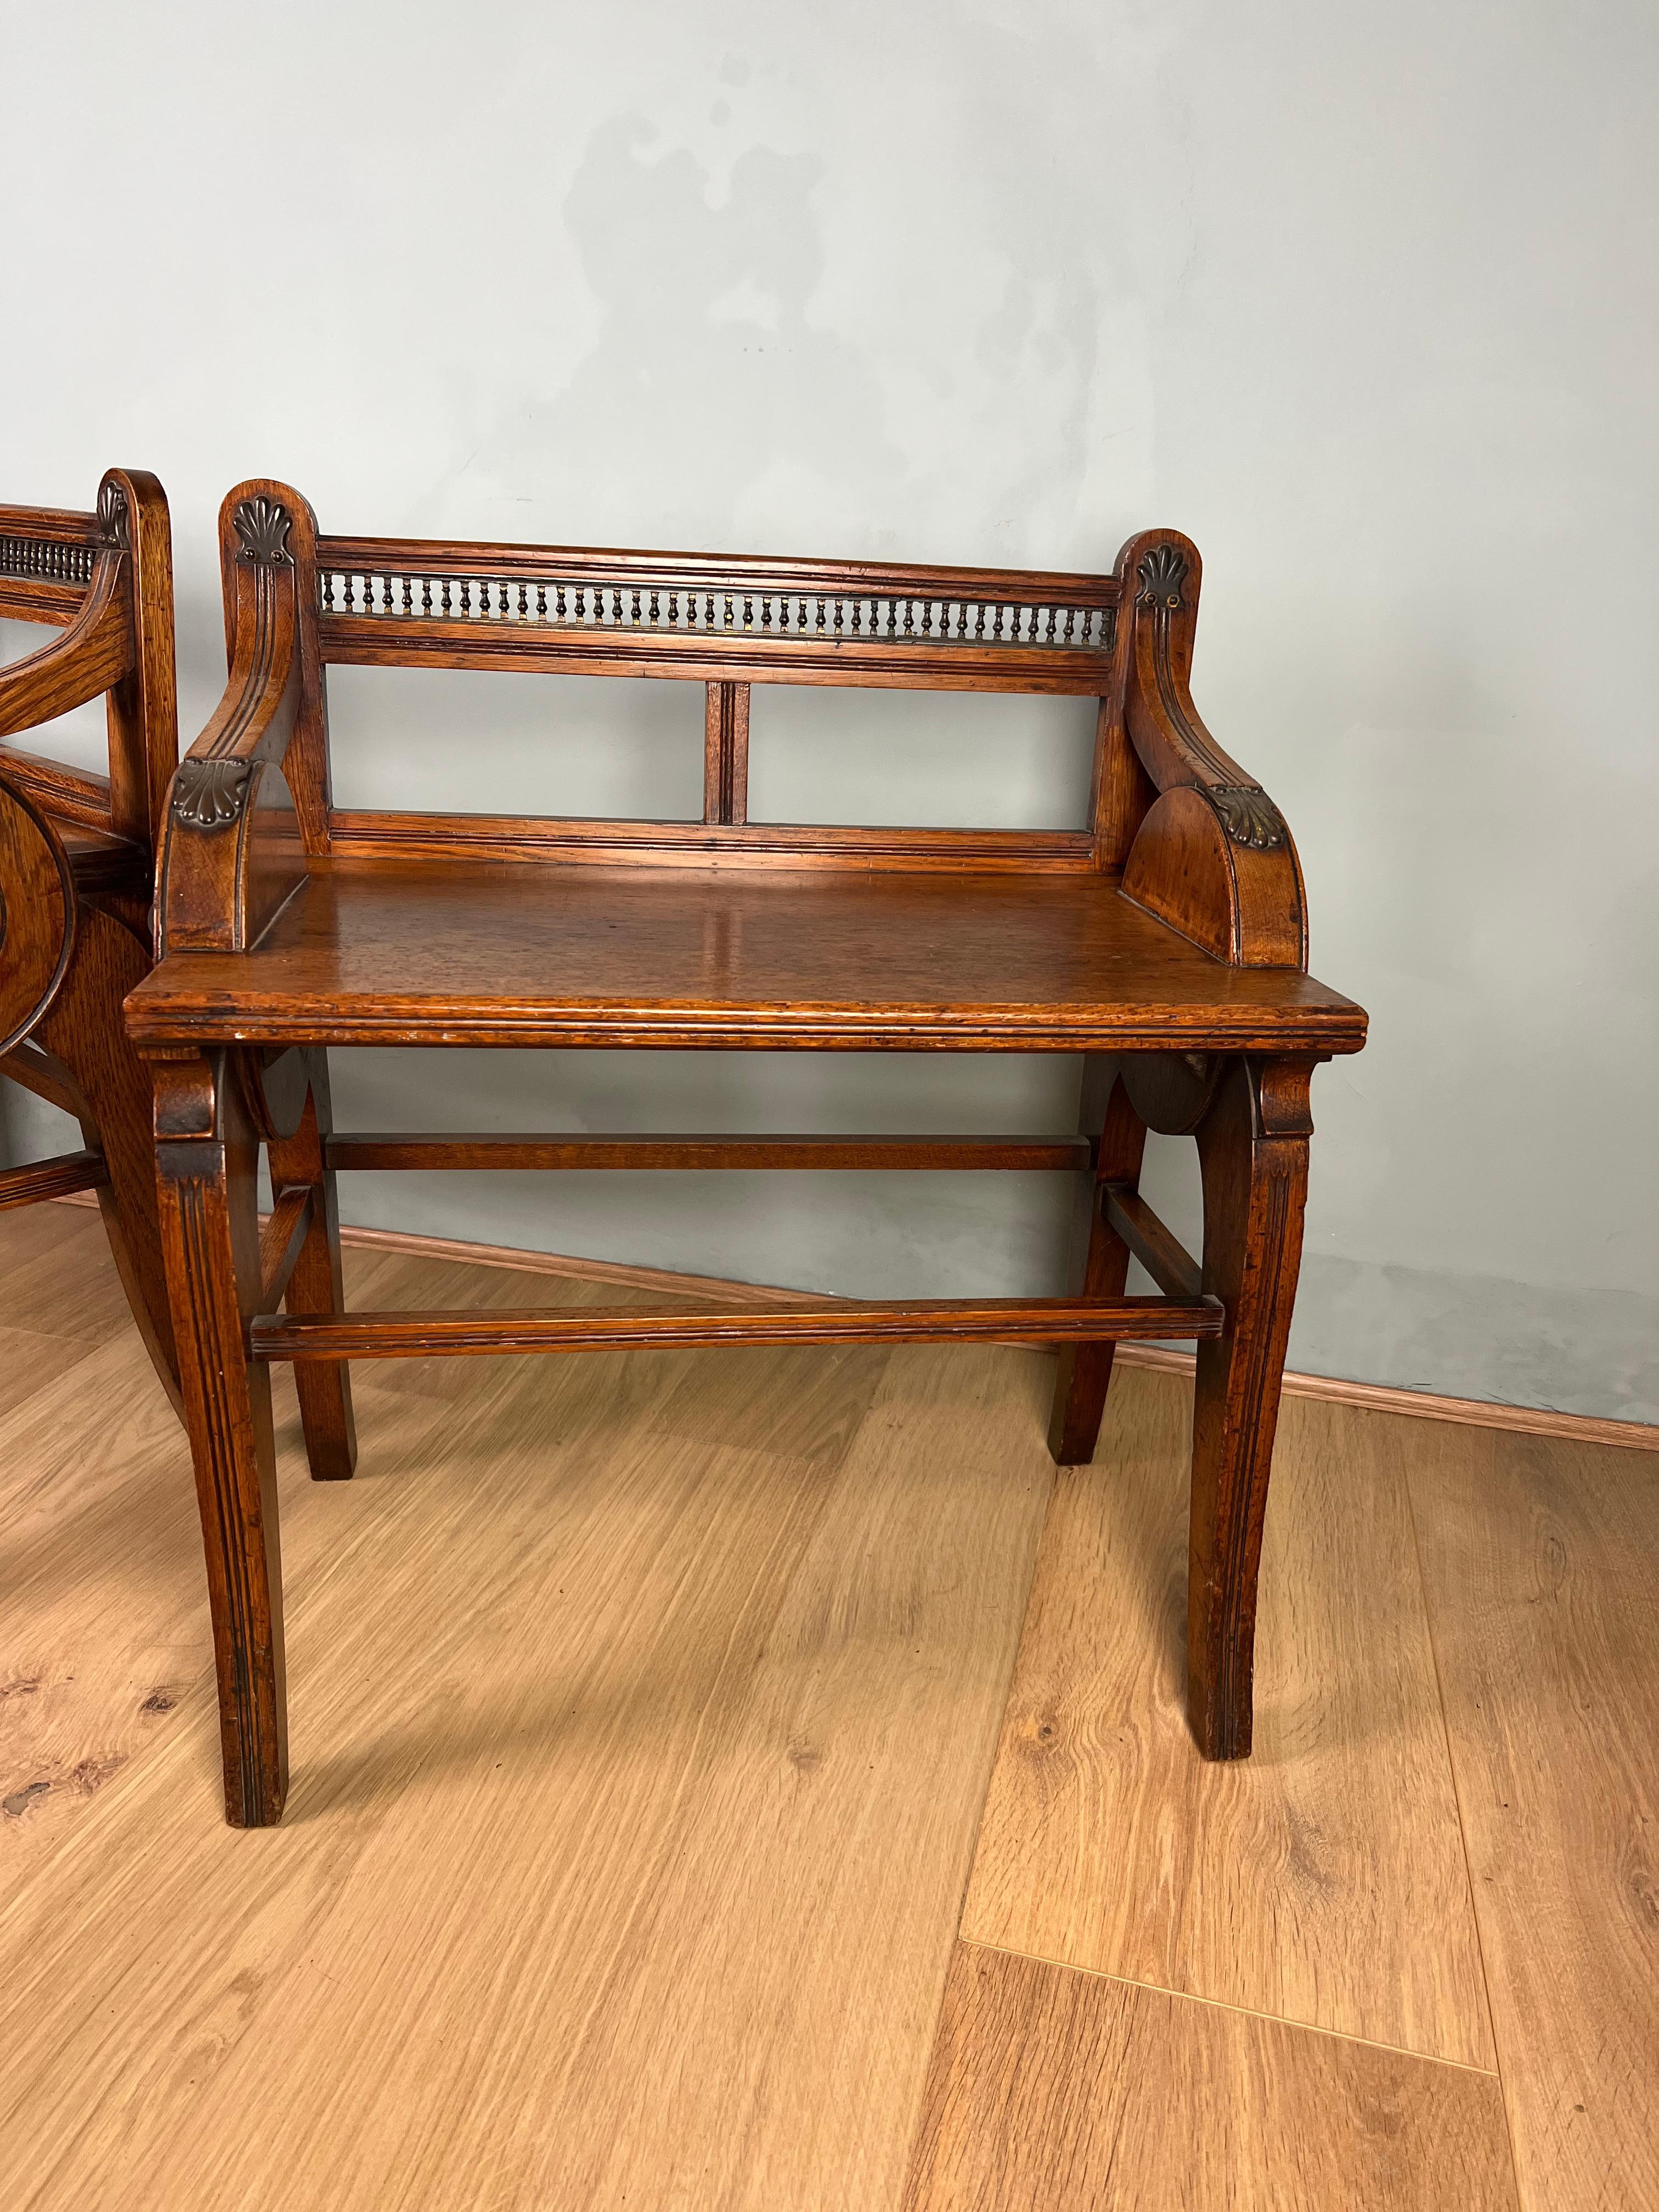 19th Century Matched Pair of English Schoolbred Benches  For Sale